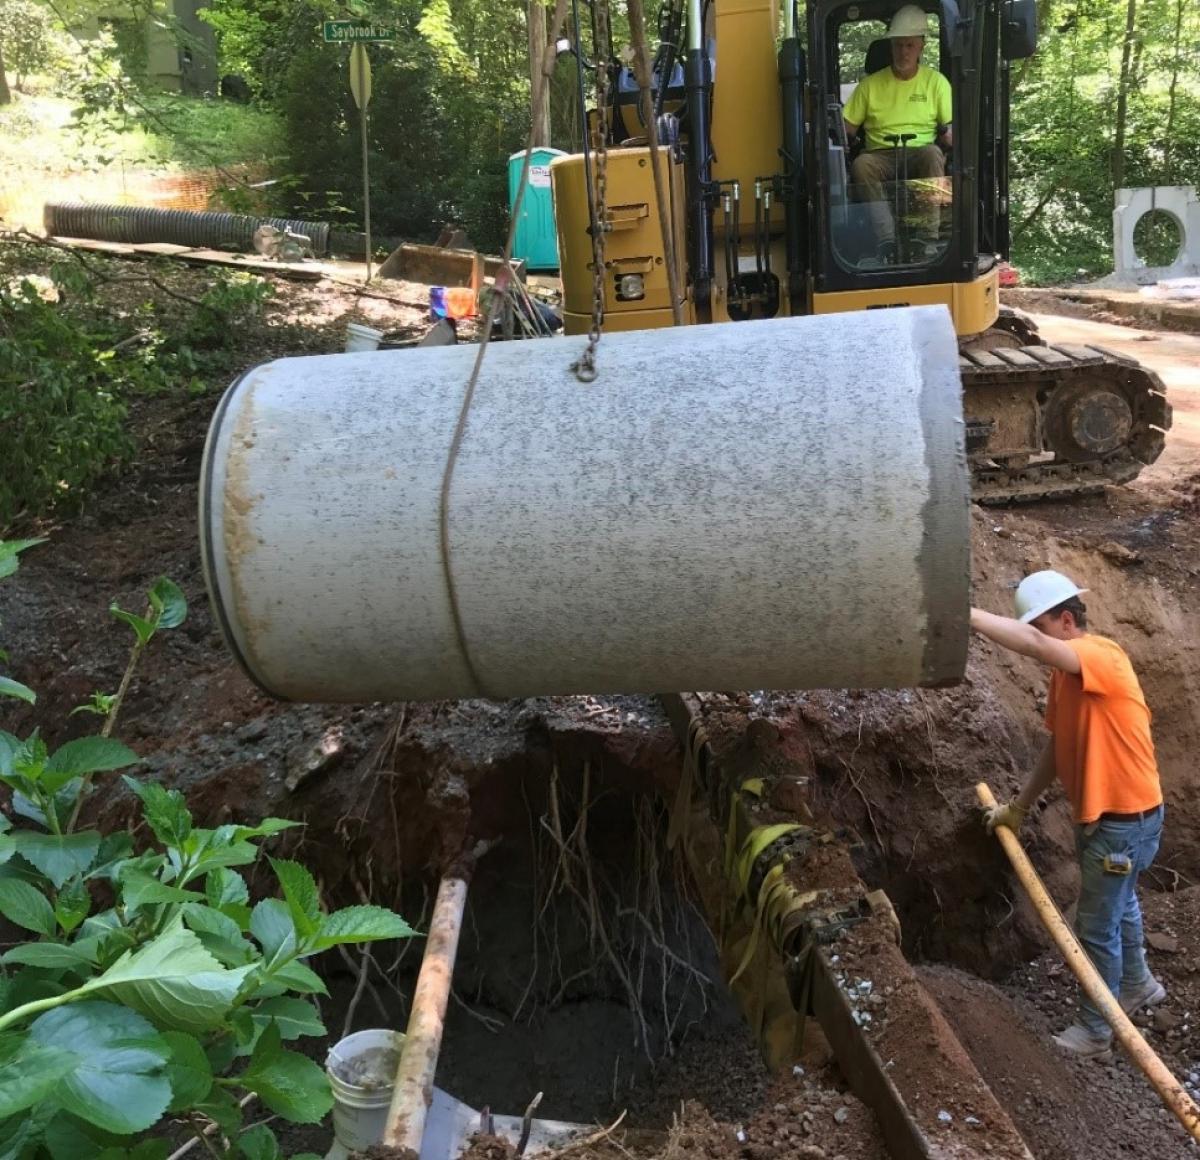 Crews complete an overhaul of stormwater infrastructure at Inman and Saybrook Drive in March 2020, replacing multiple pipes.